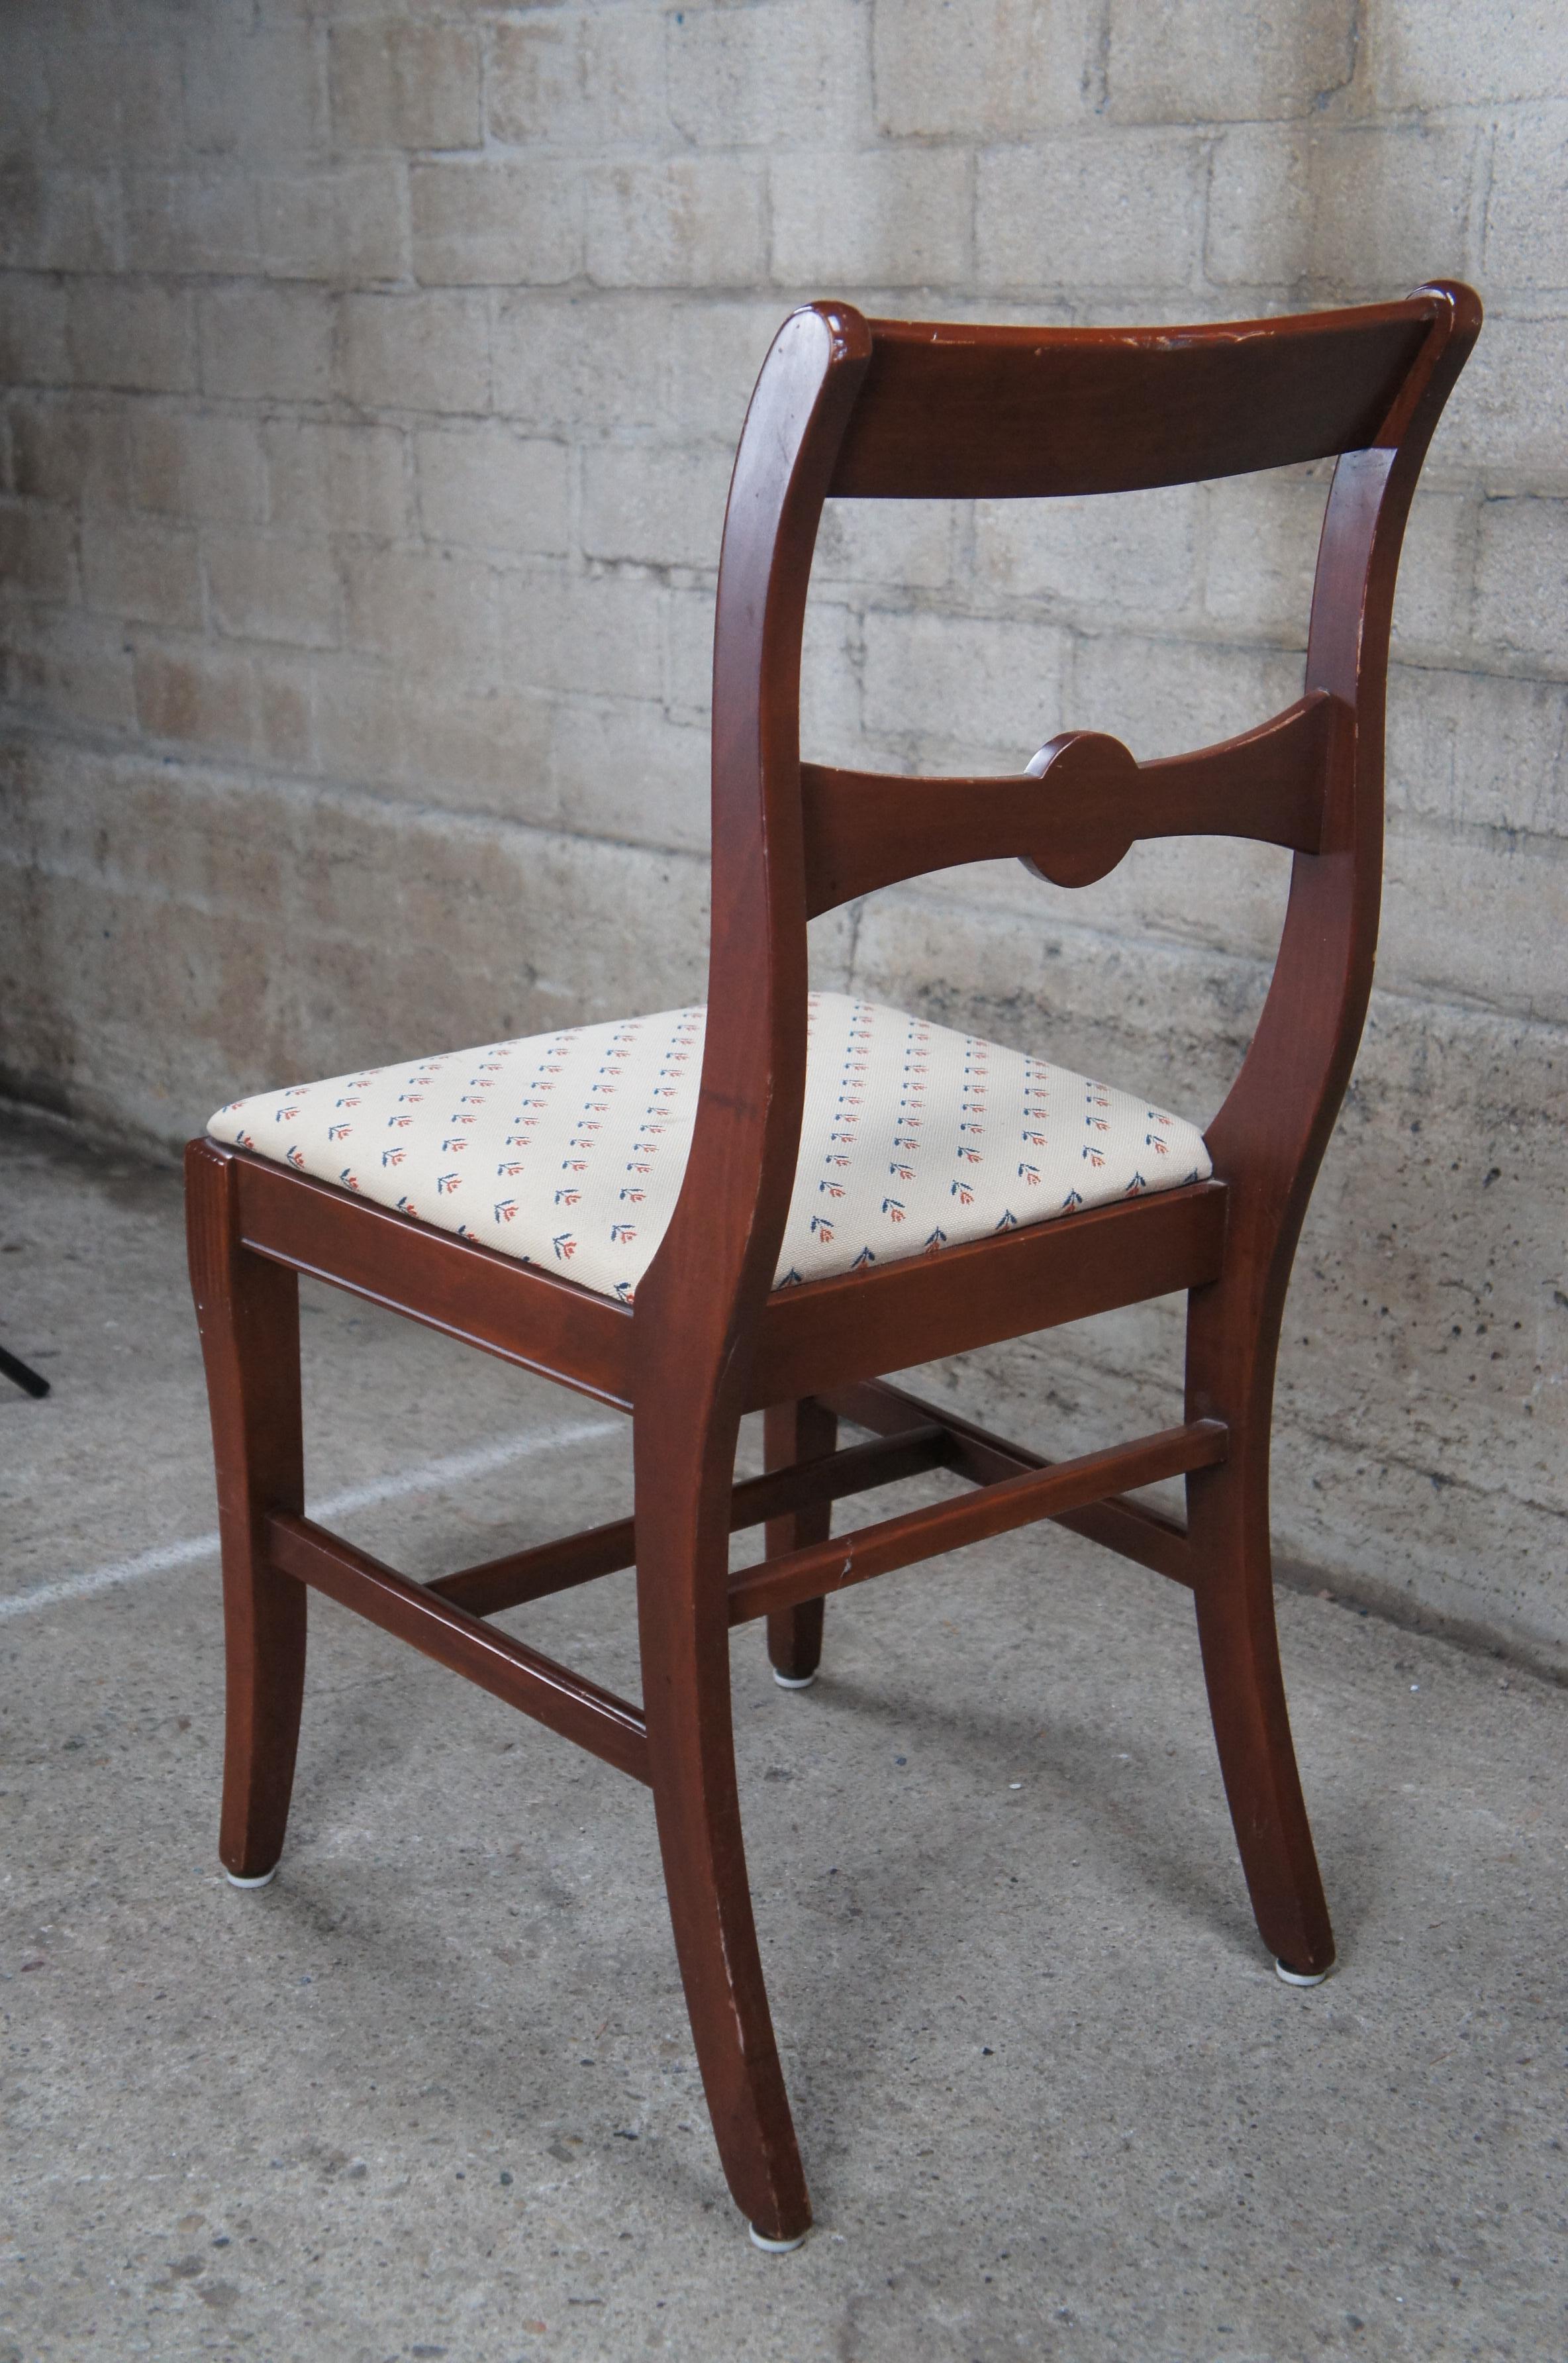 Upholstery Antique Duncan Phyfe English Regency Style Mahogany Bow Back Dining Side Chair  For Sale